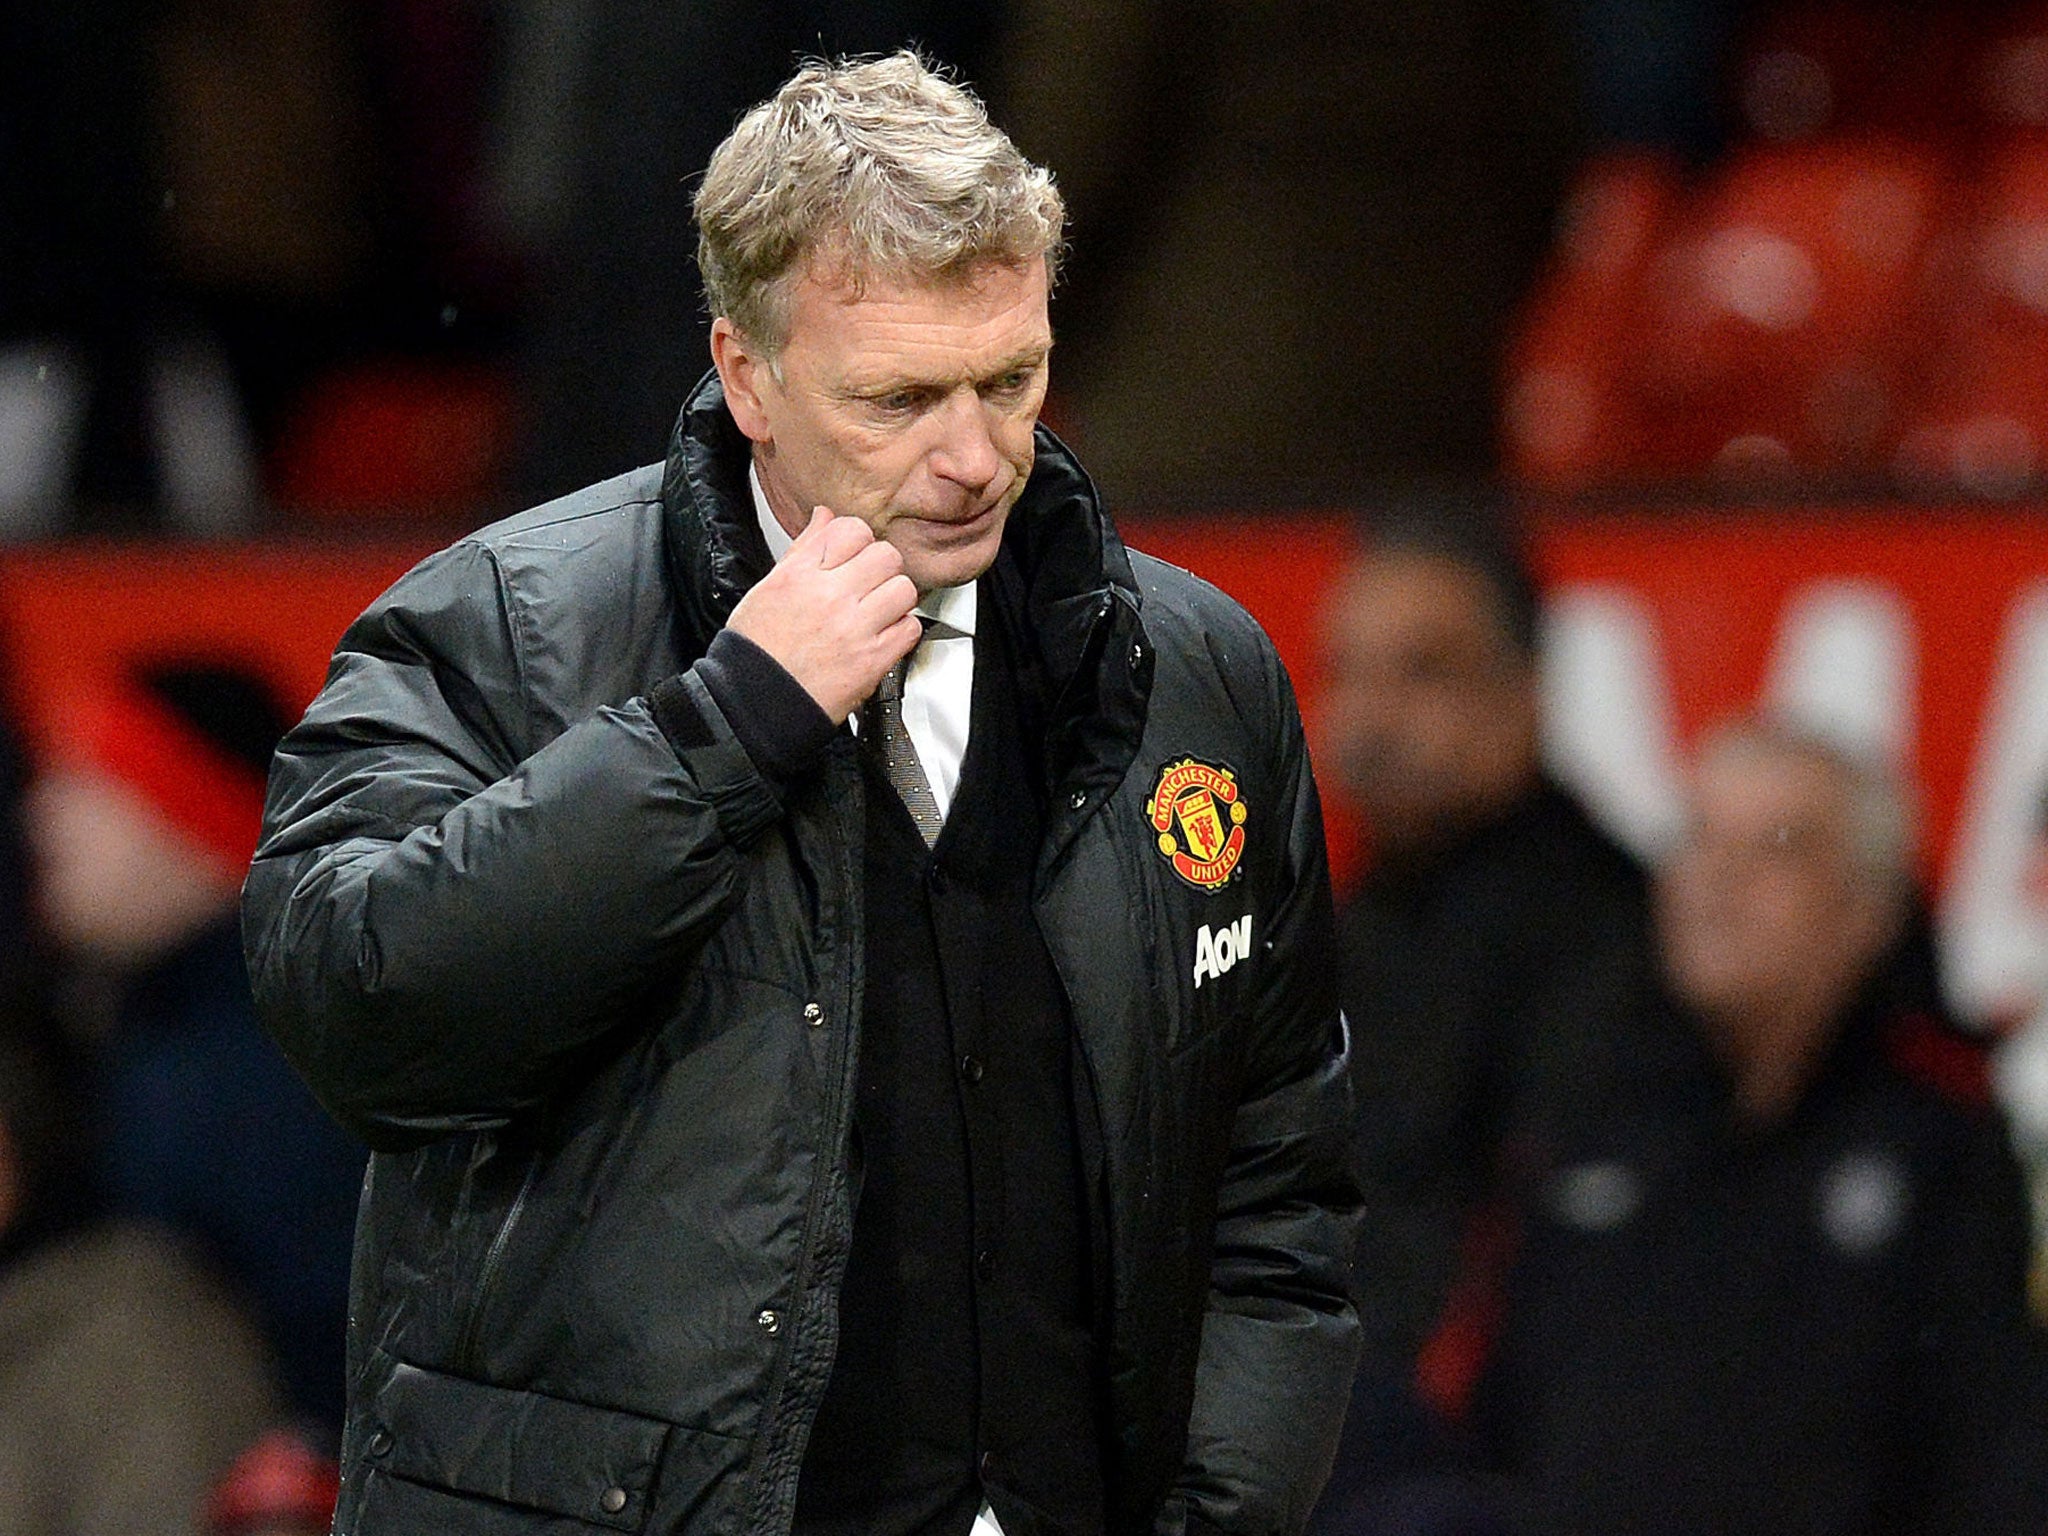 David Moyes says his team is in need of urgent overhaul